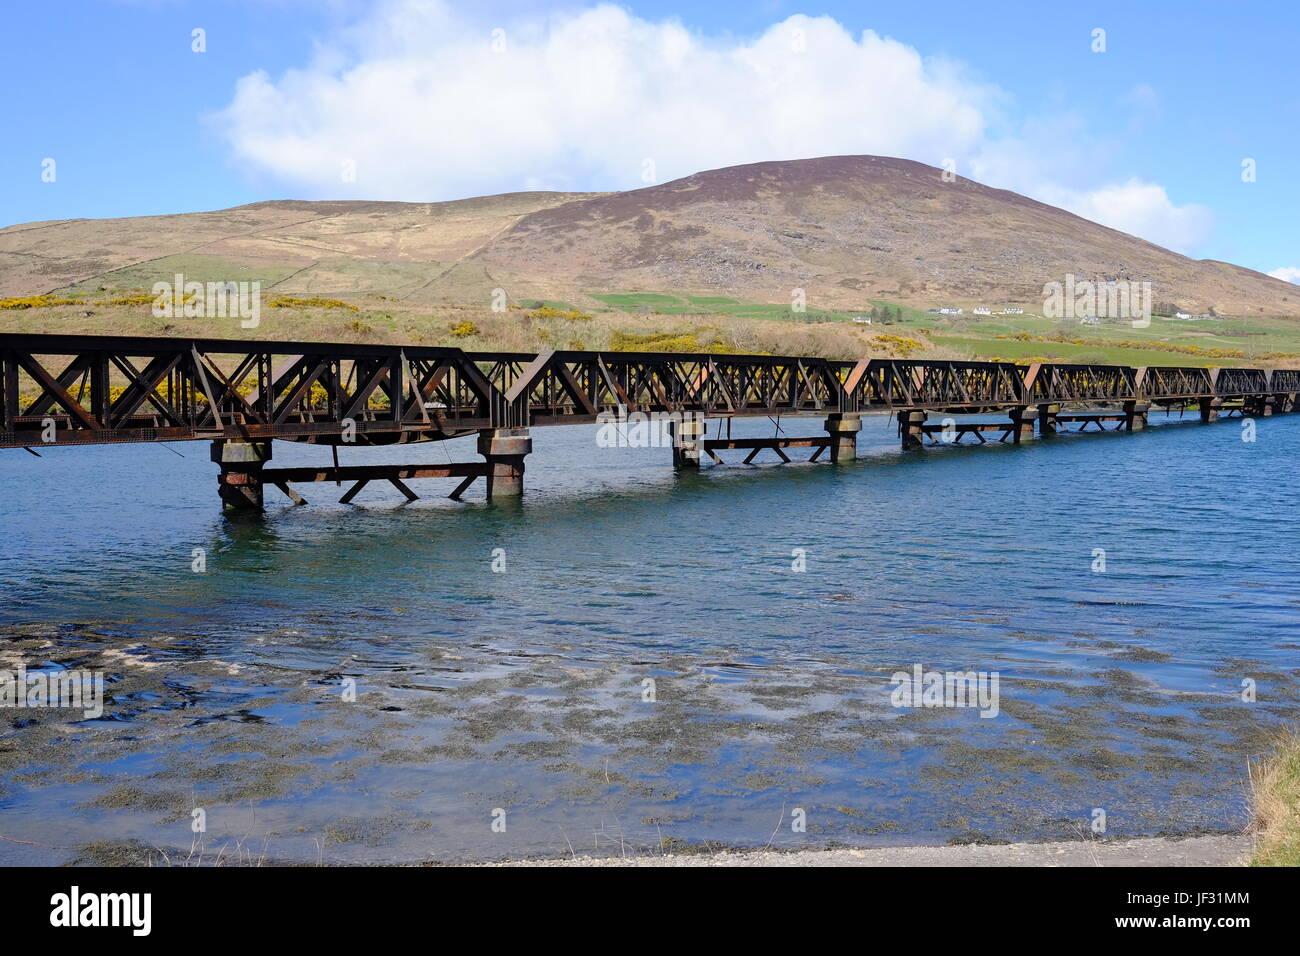 The railway bridge over the River Fertha in Cahirsiveen, County Kerry, Ireland on the Ring of Kerry route and the Wild Atlantic Way Stock Photo